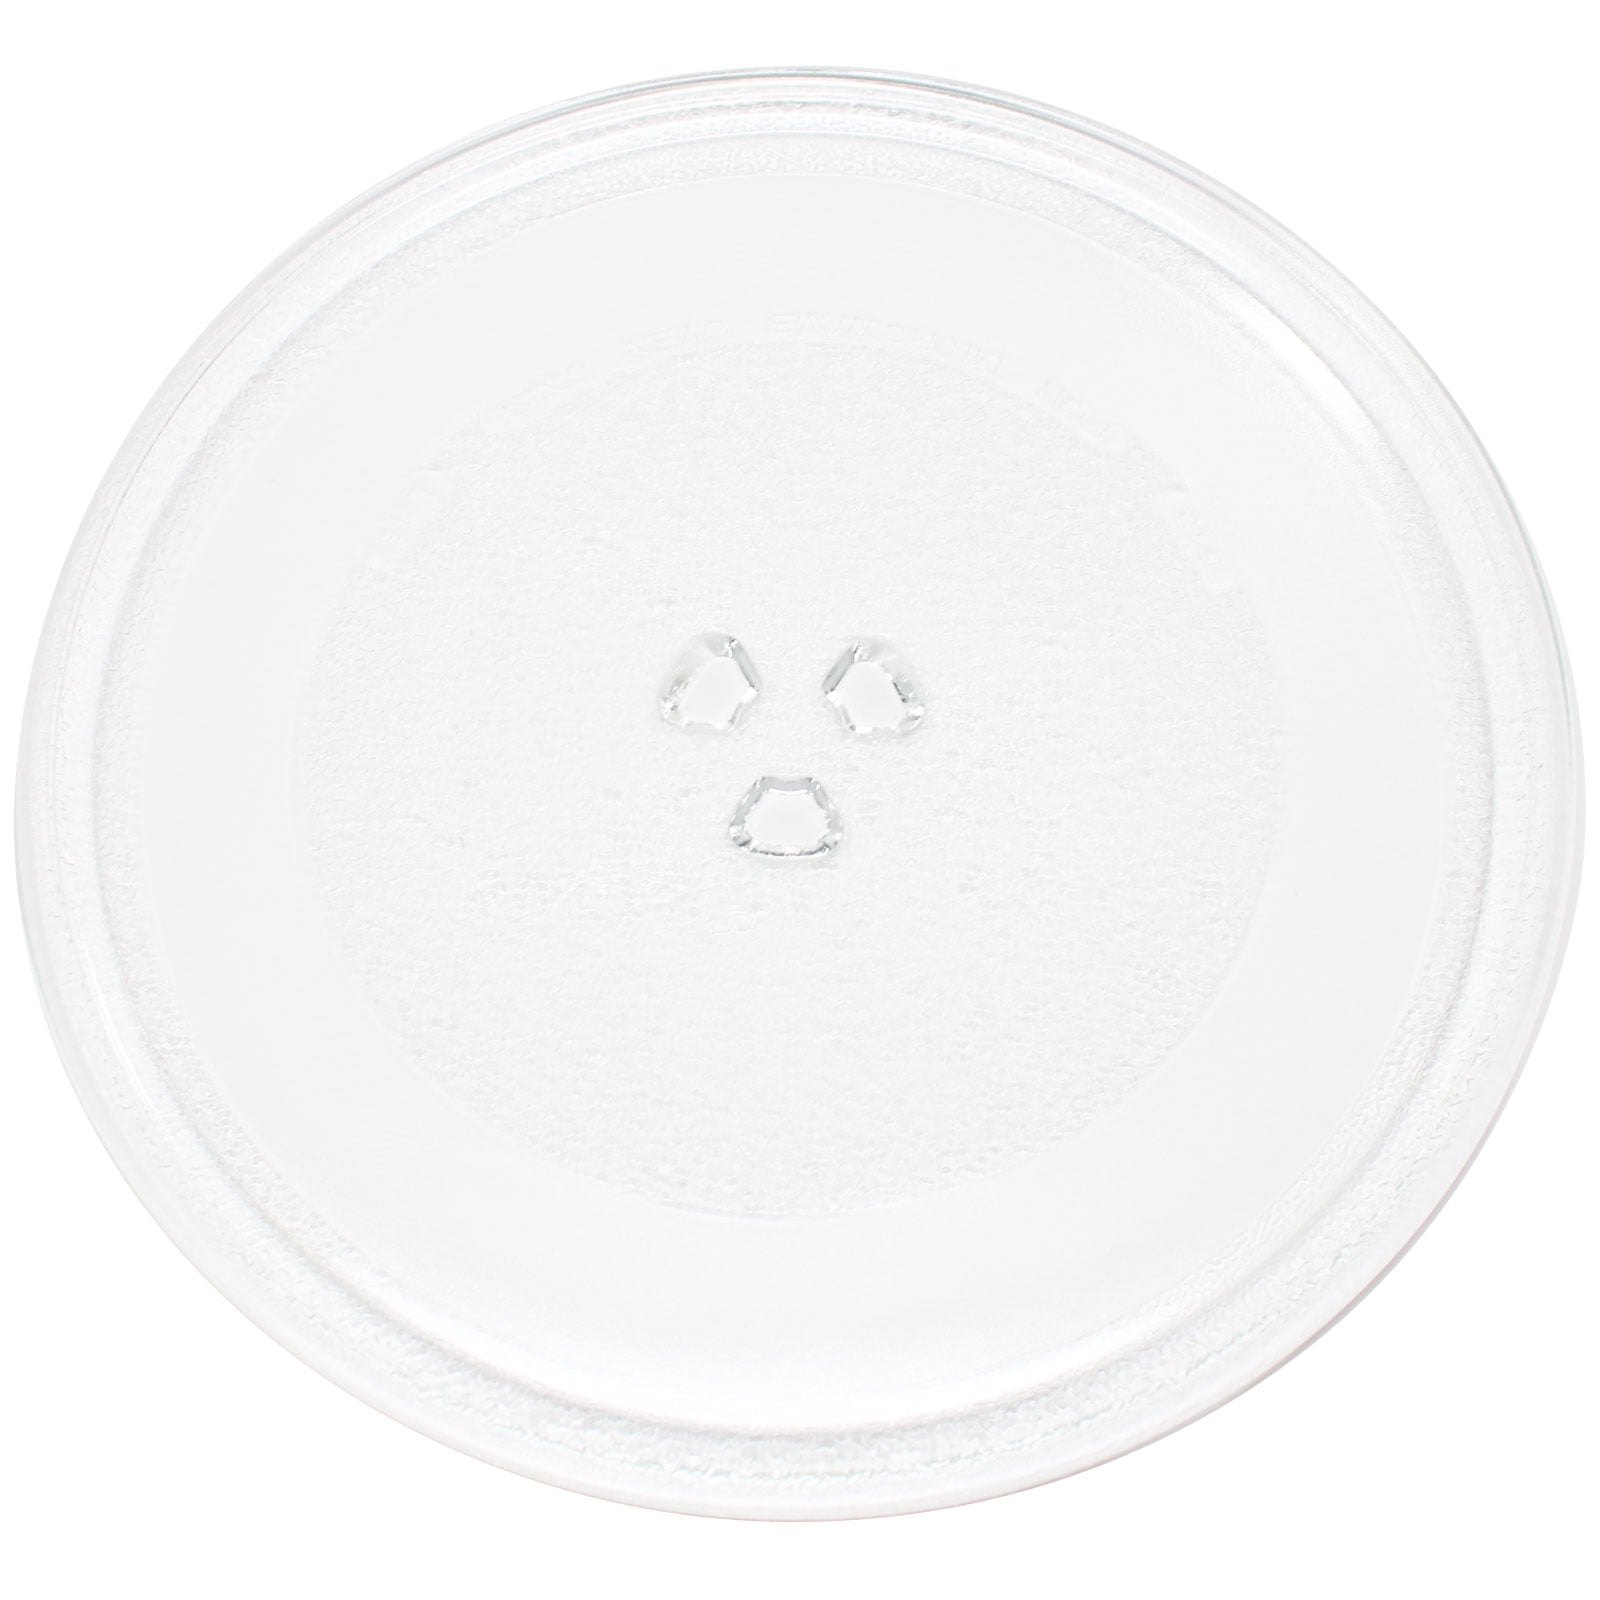 9 5/8 Compatible Emerson 3390W1A035 Microwave Glass Turntable Tray Replacement Emerson MW8781SB Microwave Glass Plate 245 mm